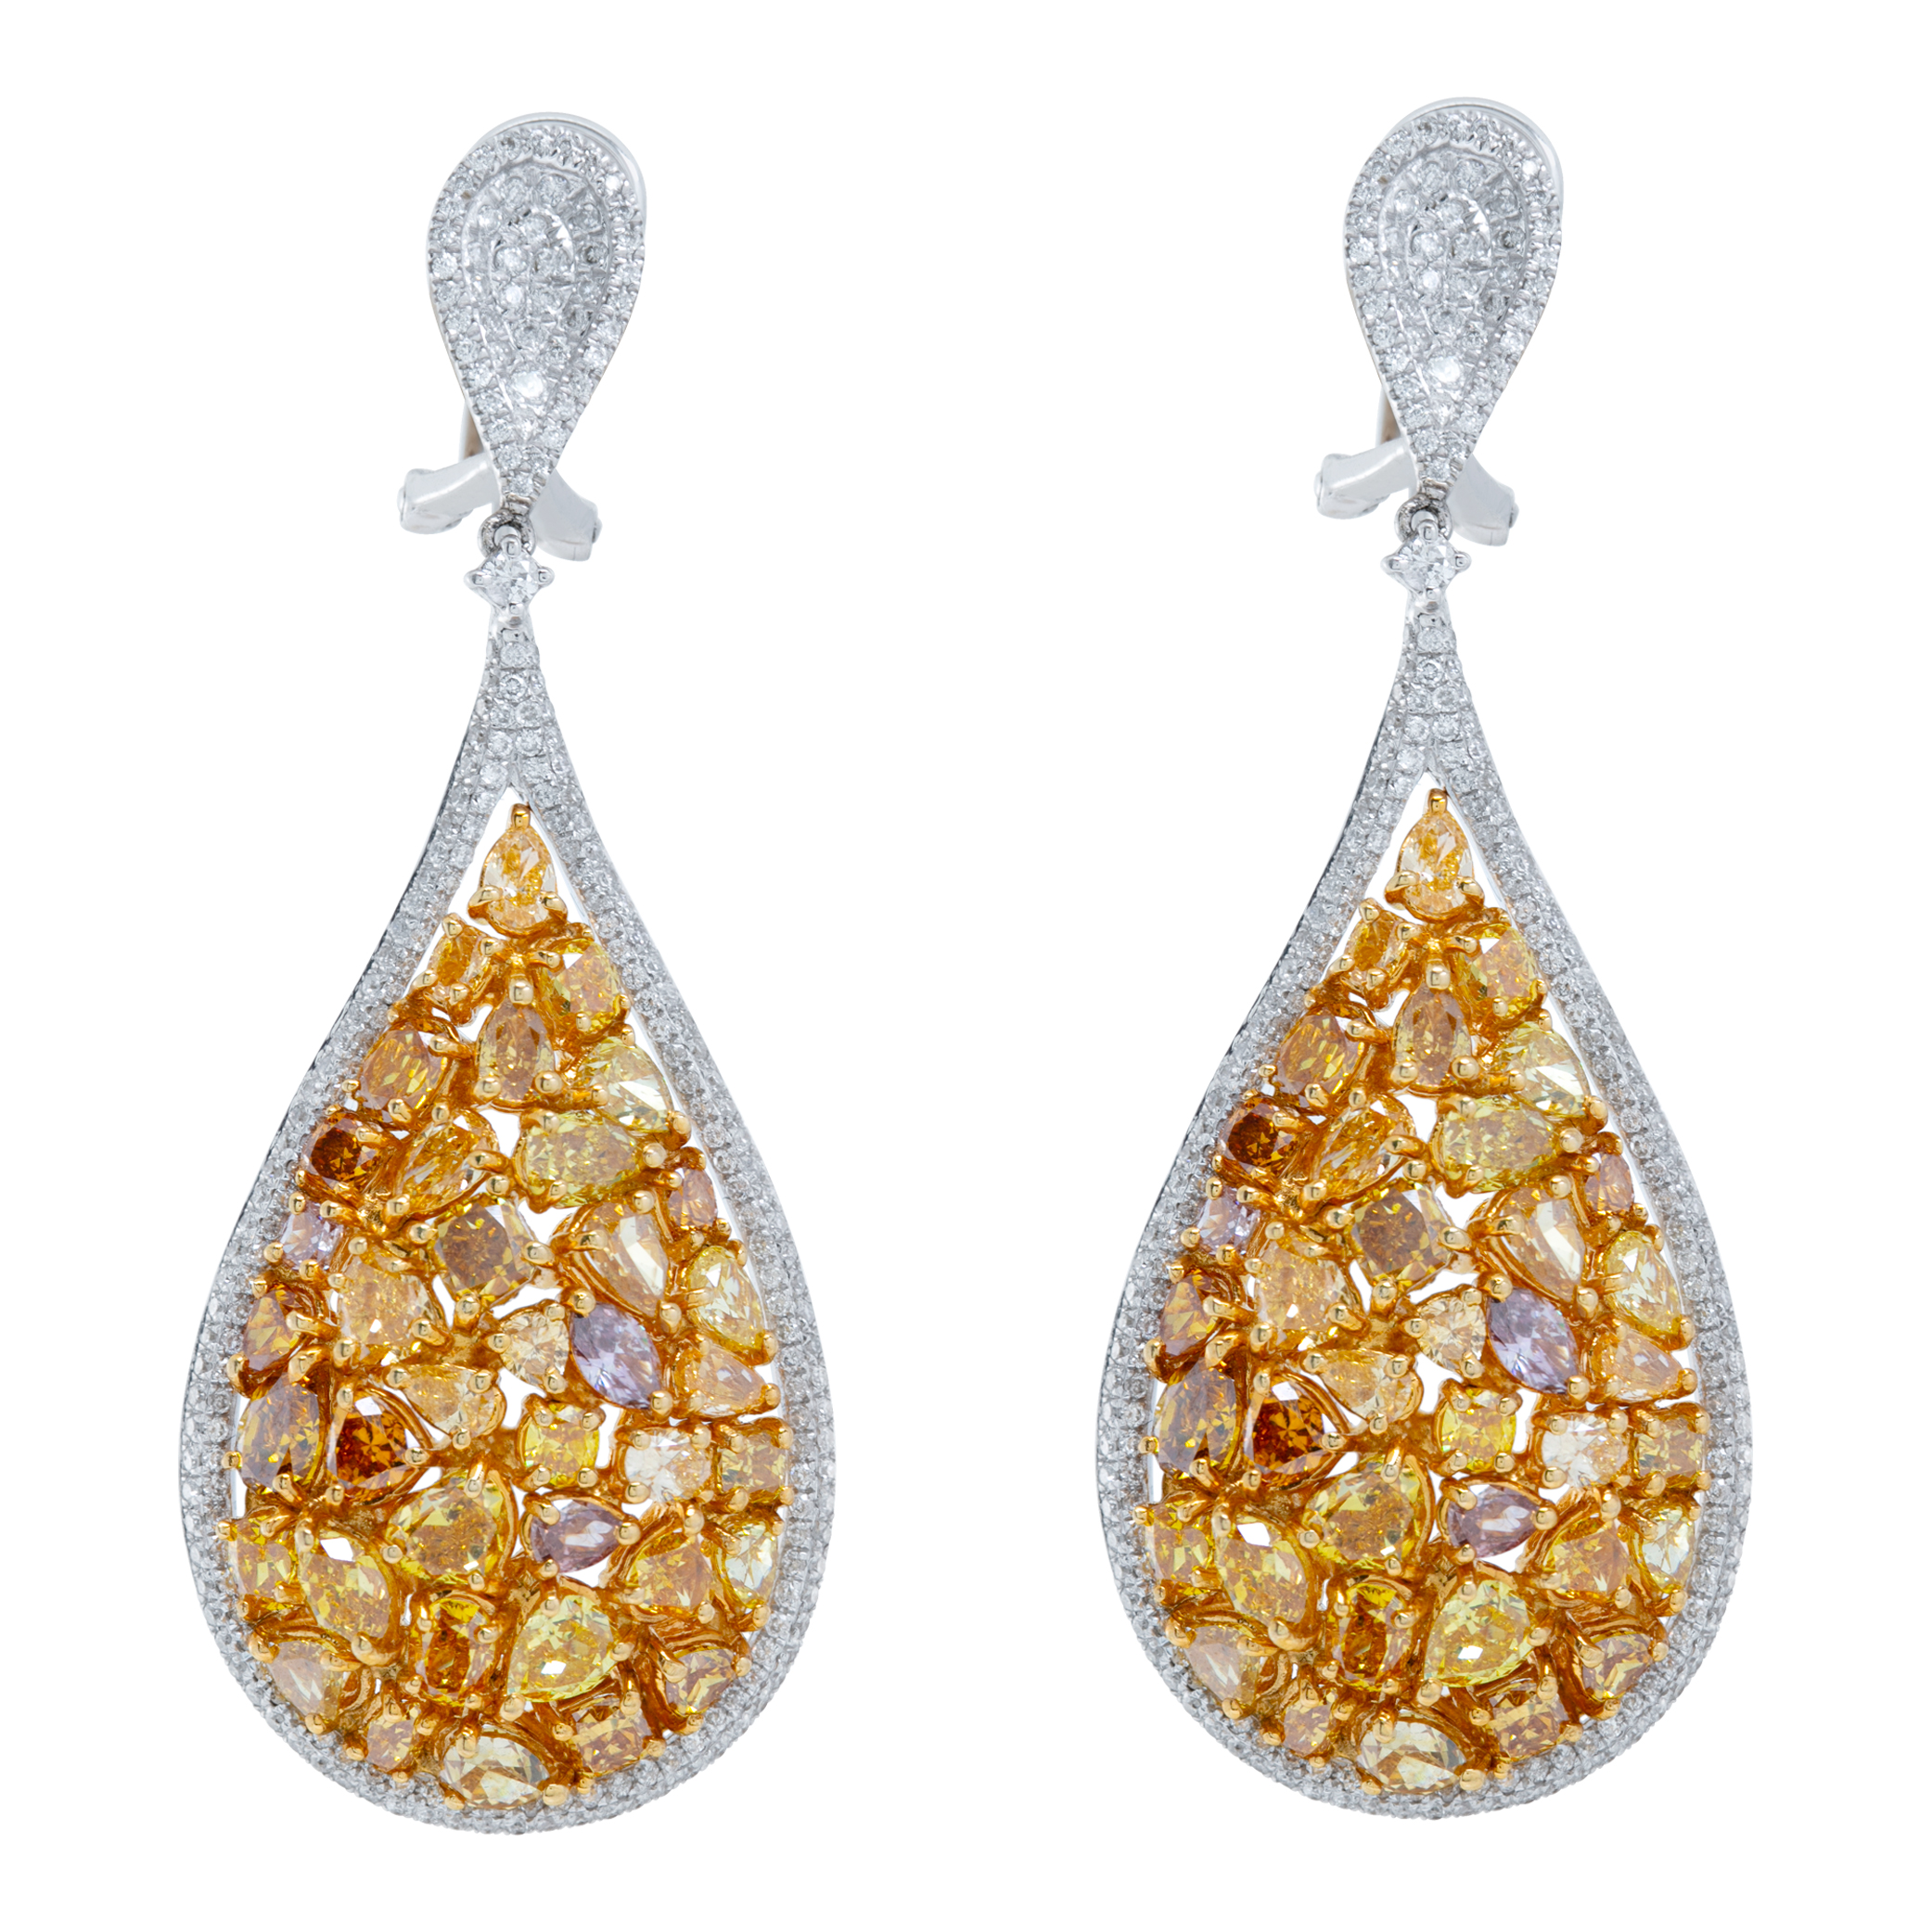 Brilliant oval, pear, cushion cut fancy yellow diamonds (10.45 carats) and round brilliant cut white diamonds hanging earrings in 18k white and yellow gold. (Stones)